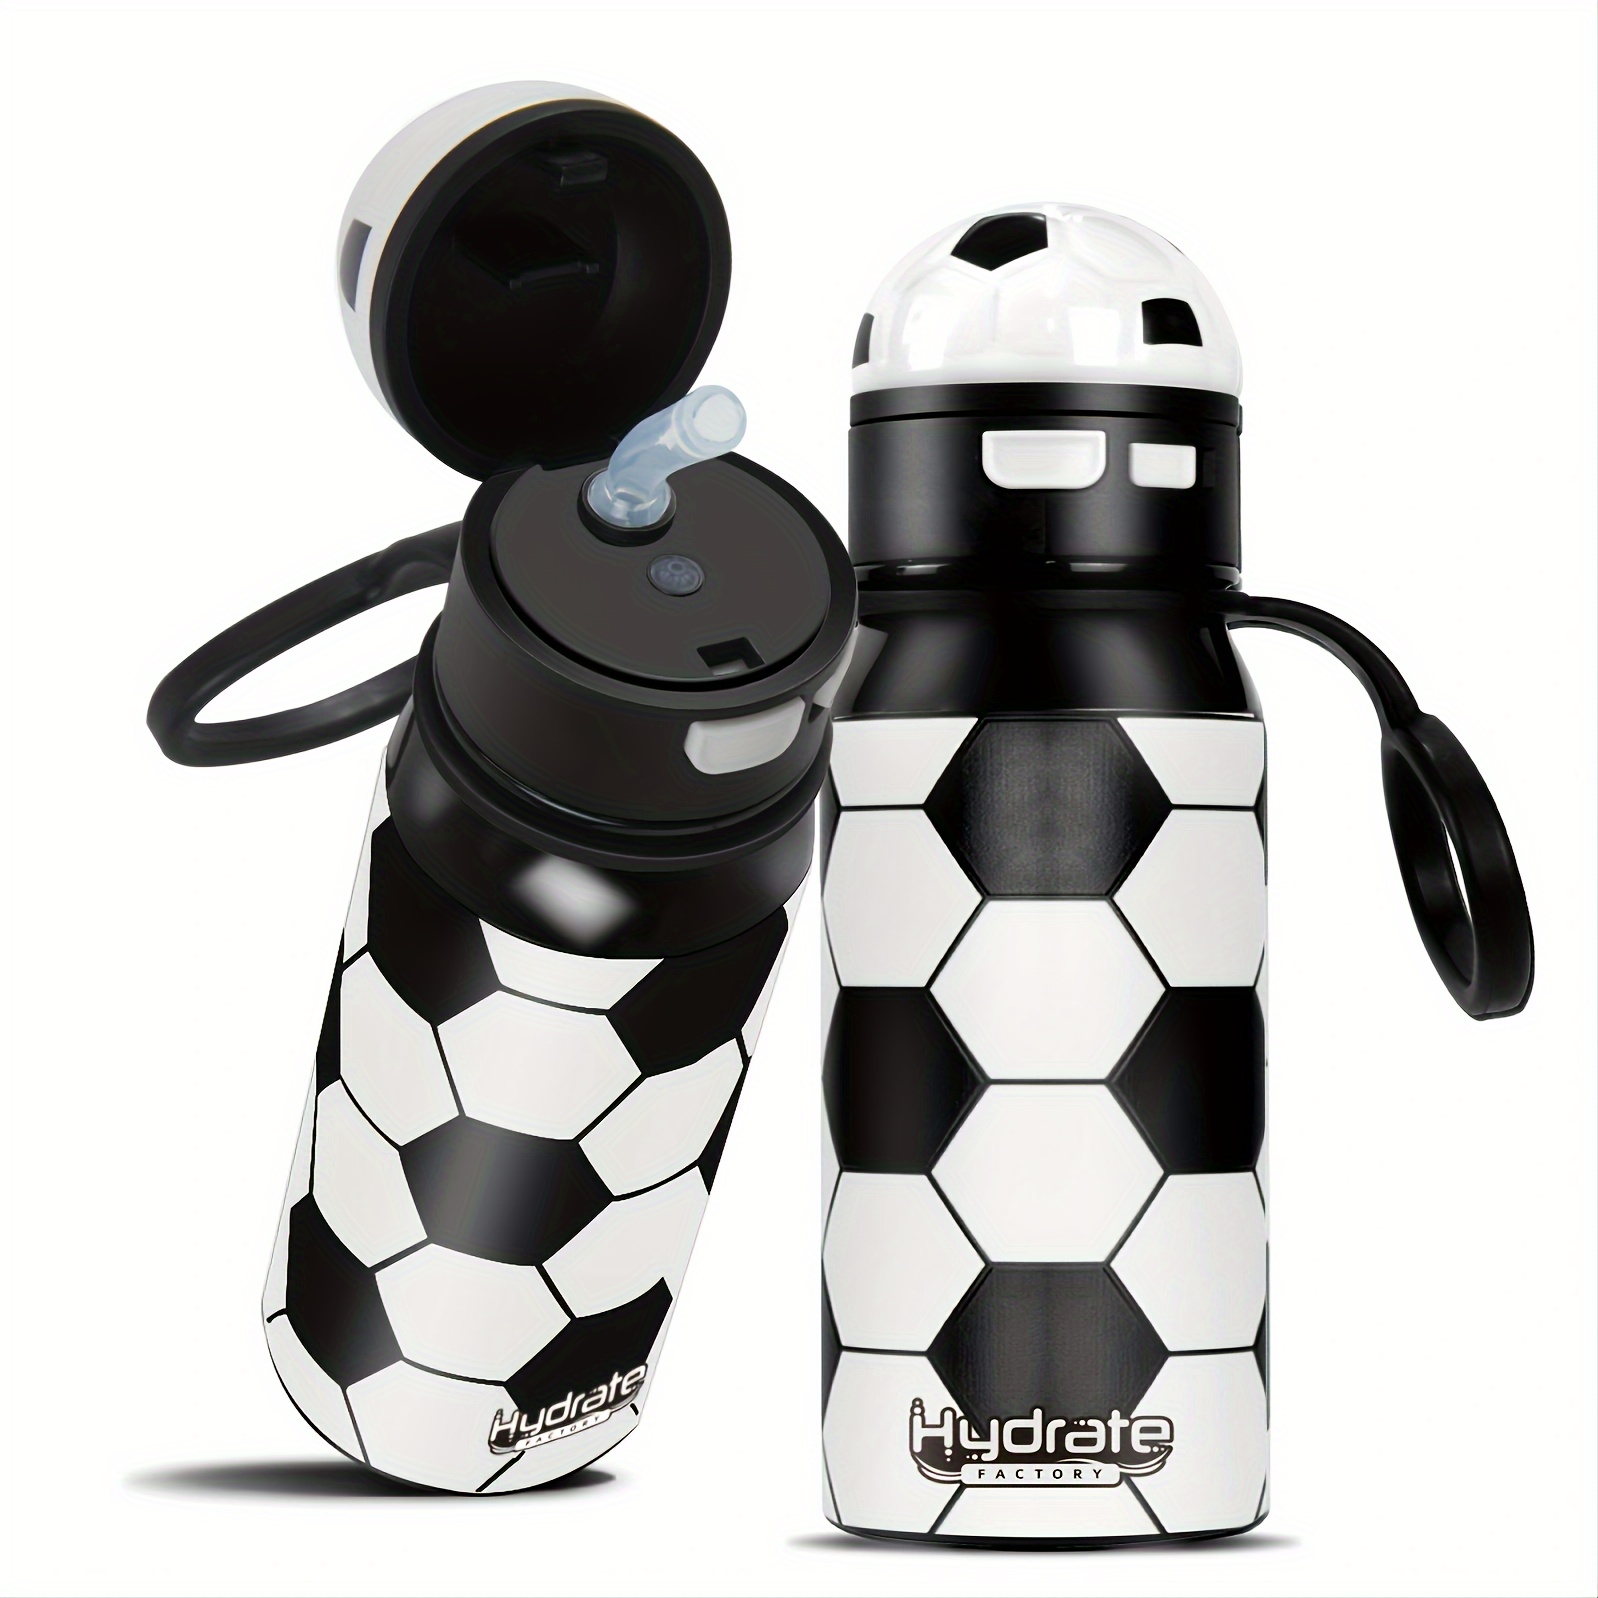 https://img.kwcdn.com/product/double-insulated-stainless-steel-water-bottle/d69d2f15w98k18-6360a891/Fancyalgo/VirtualModelMatting/6be86939a98f81fb6600ae23aee1abad.jpg